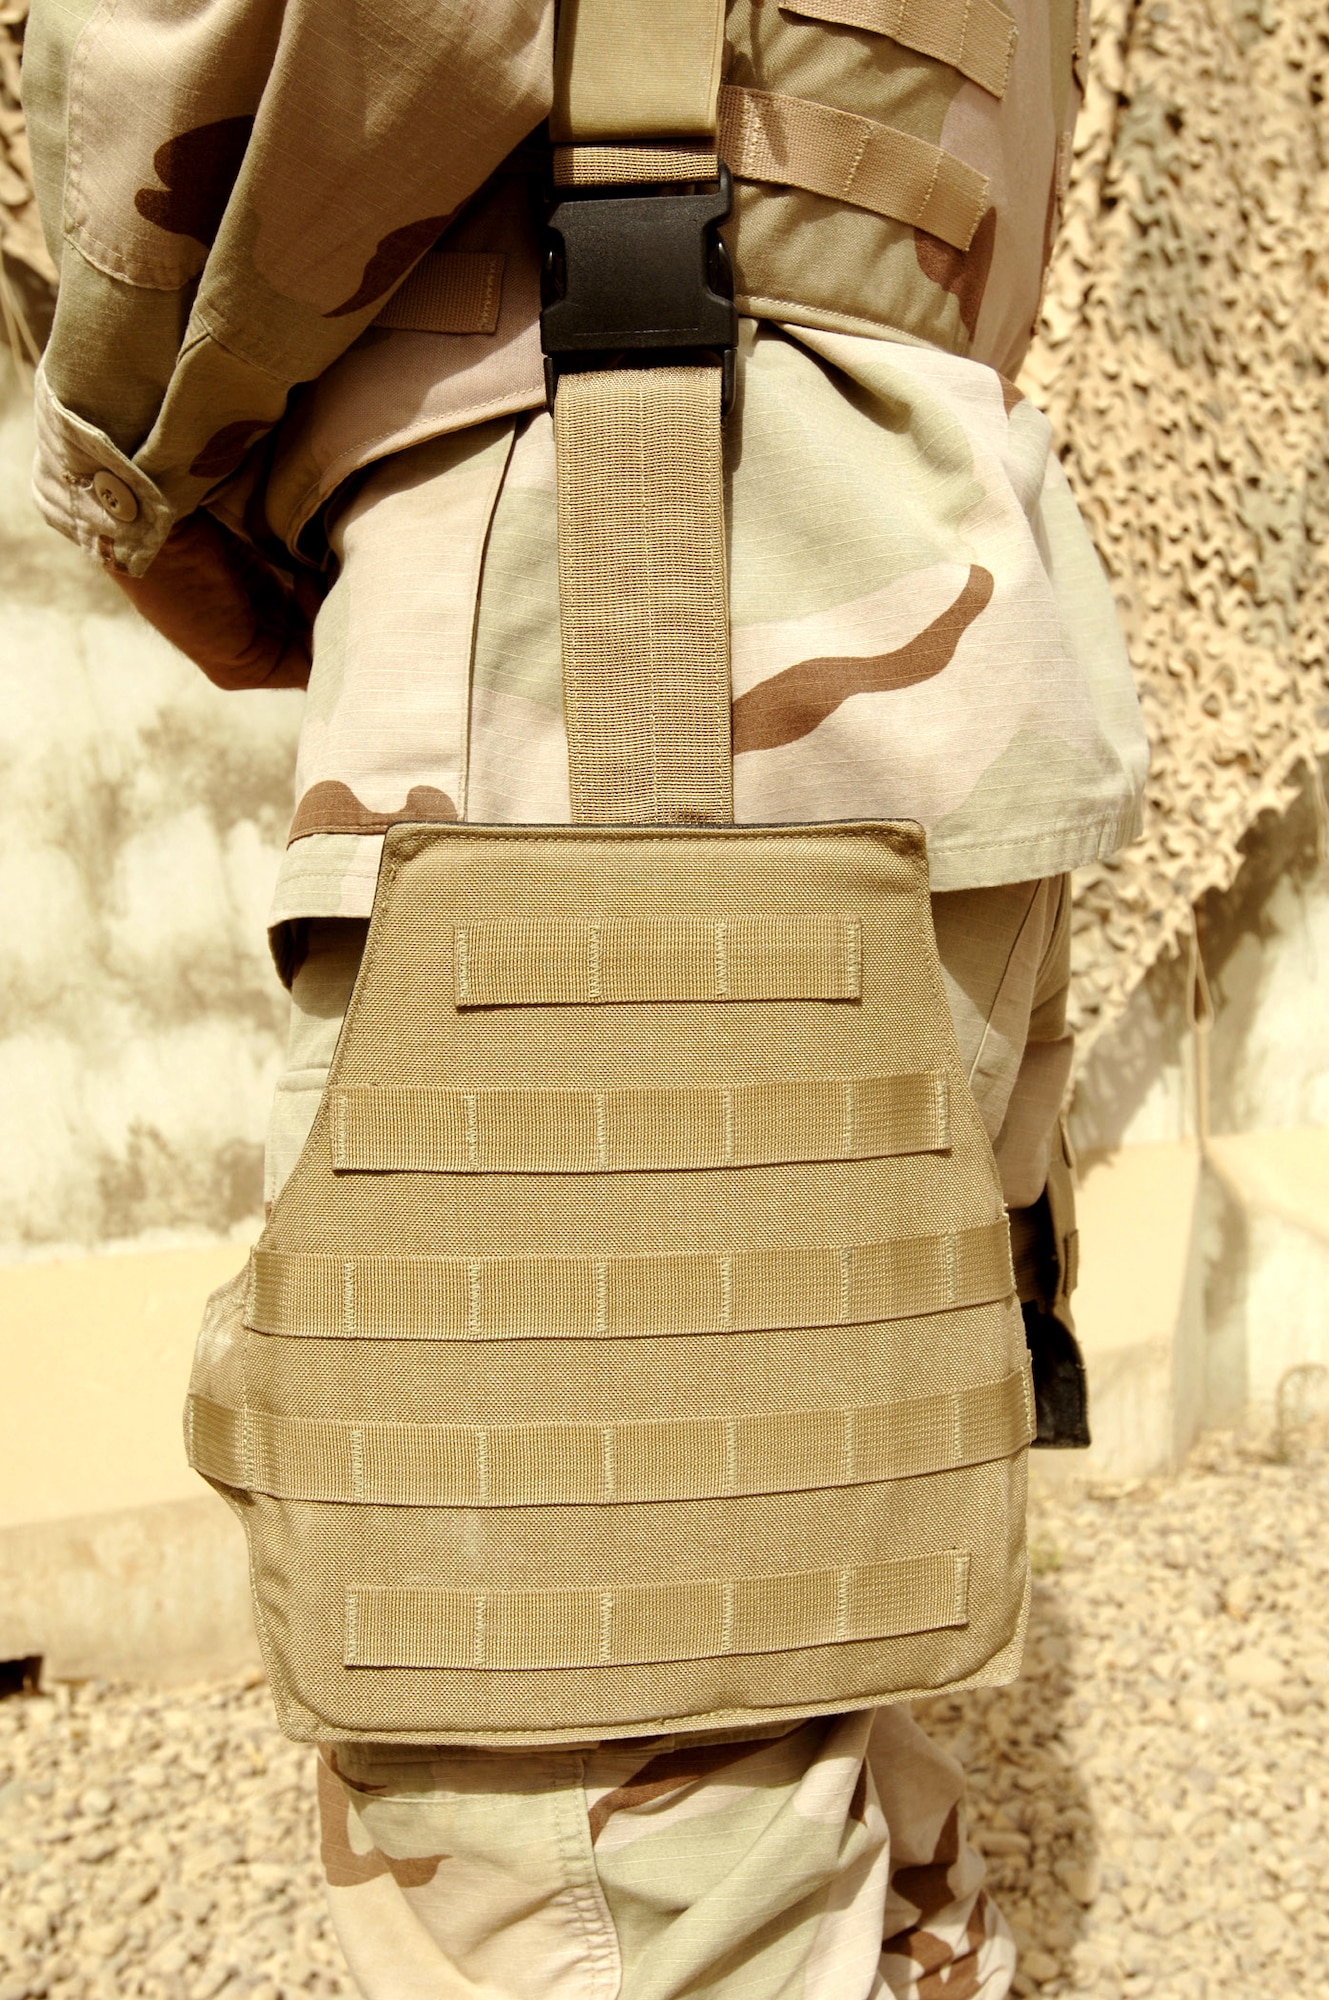 BALAD AIR BASE, Iraq -- Tech. Sgt. Gerald Lowry displays the leg protector that is part of the new "Level 4" body armor being tested here by Air Force Research Laboratory officials at Wright-Patterson Air Force Base, Ohio.  The armor includes a new form of ceramic plate that can withstand more bullet strikes than current plates, as well as bicep and rib protectors.  Sergeant Lowry is a 332nd Expeditionary Communications Squadron network administrator.  (U.S. Air Force photo by Senior Airman Jason Robertson)